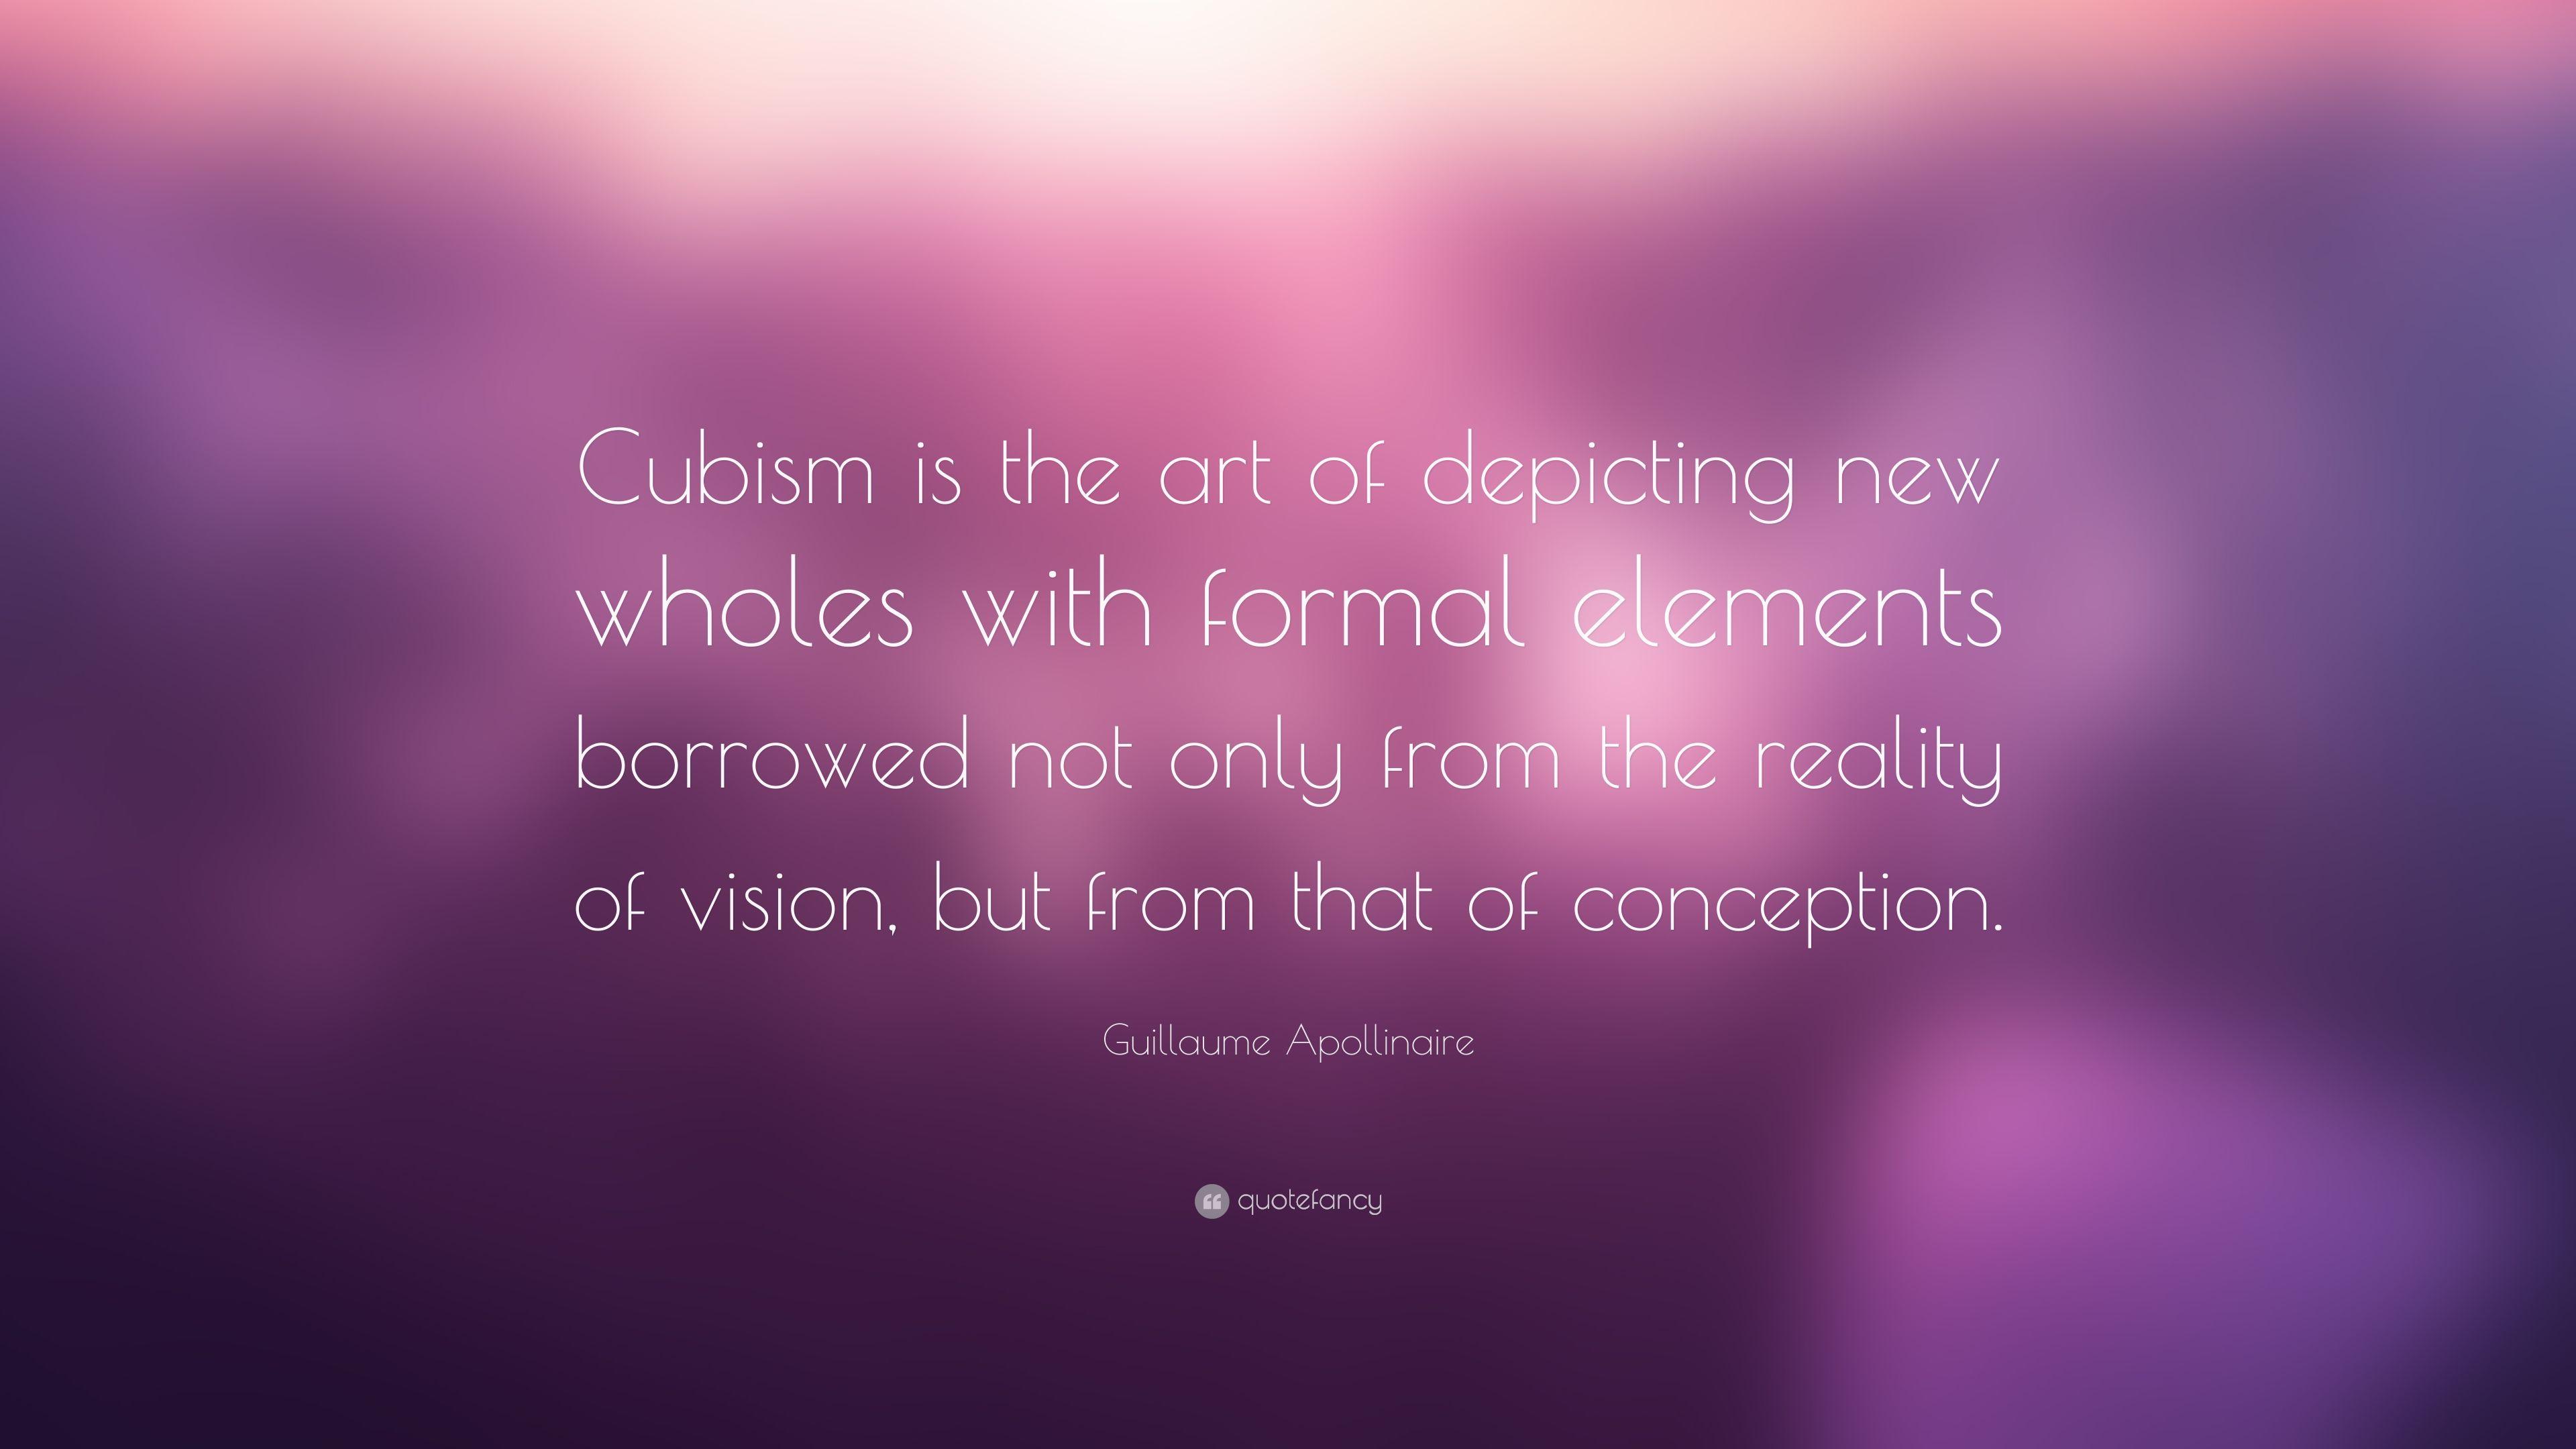 Guillaume Apollinaire Quote: “Cubism is the art of depicting new